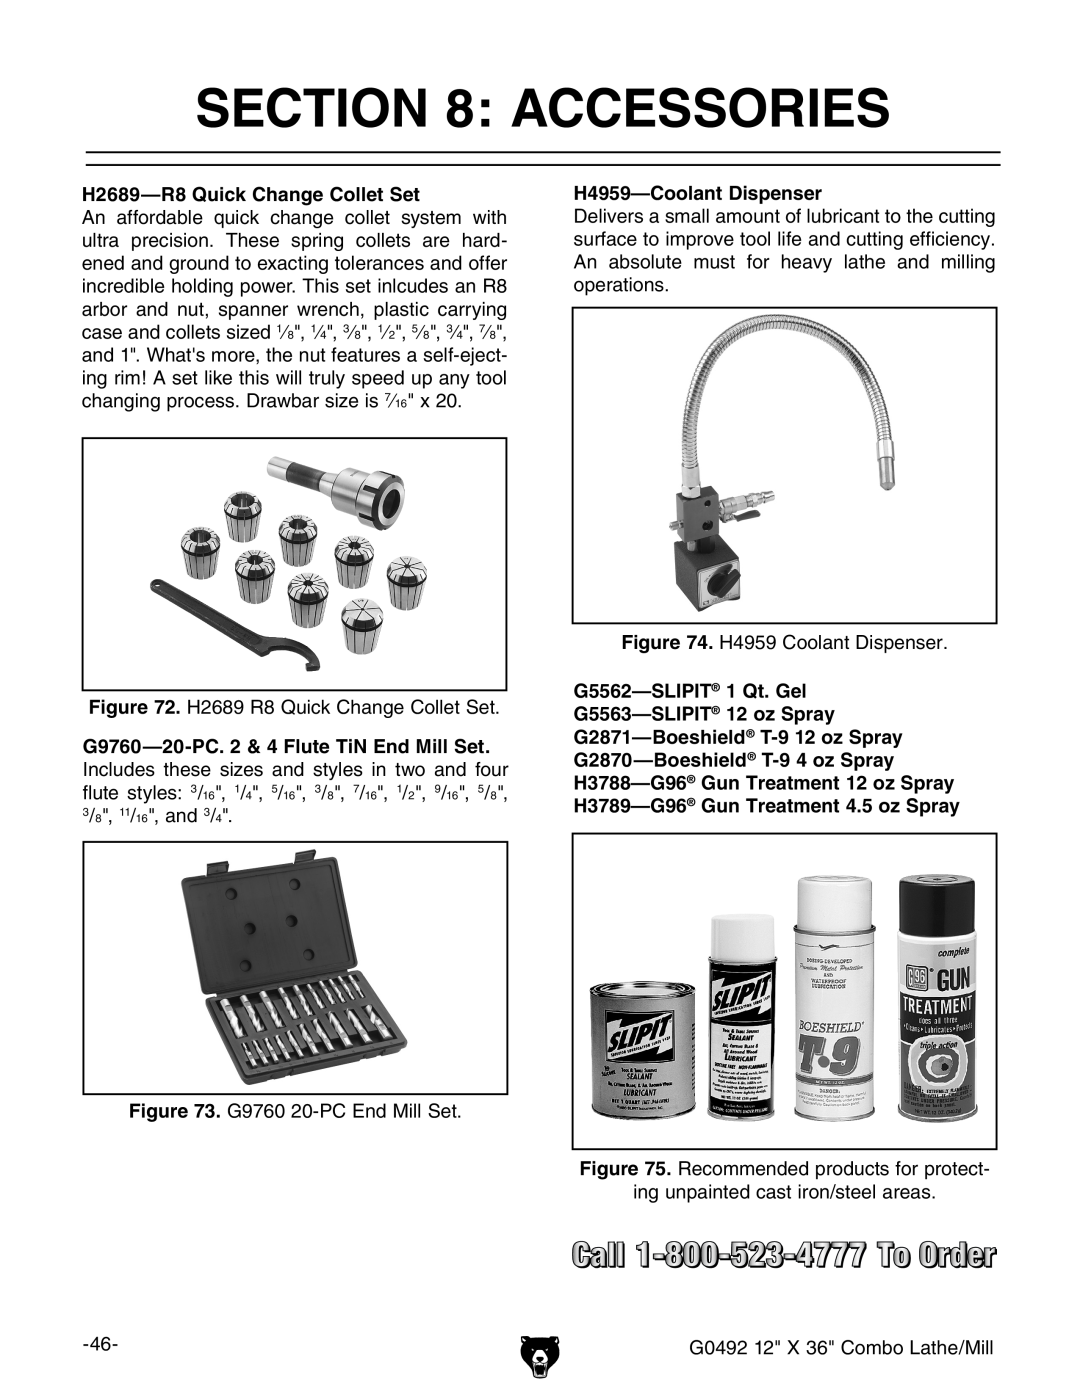 Grizzly G0492 owner manual Accessories, H2689-R8 Quick Change Collet Set, H4959-Coolant Dispenser 